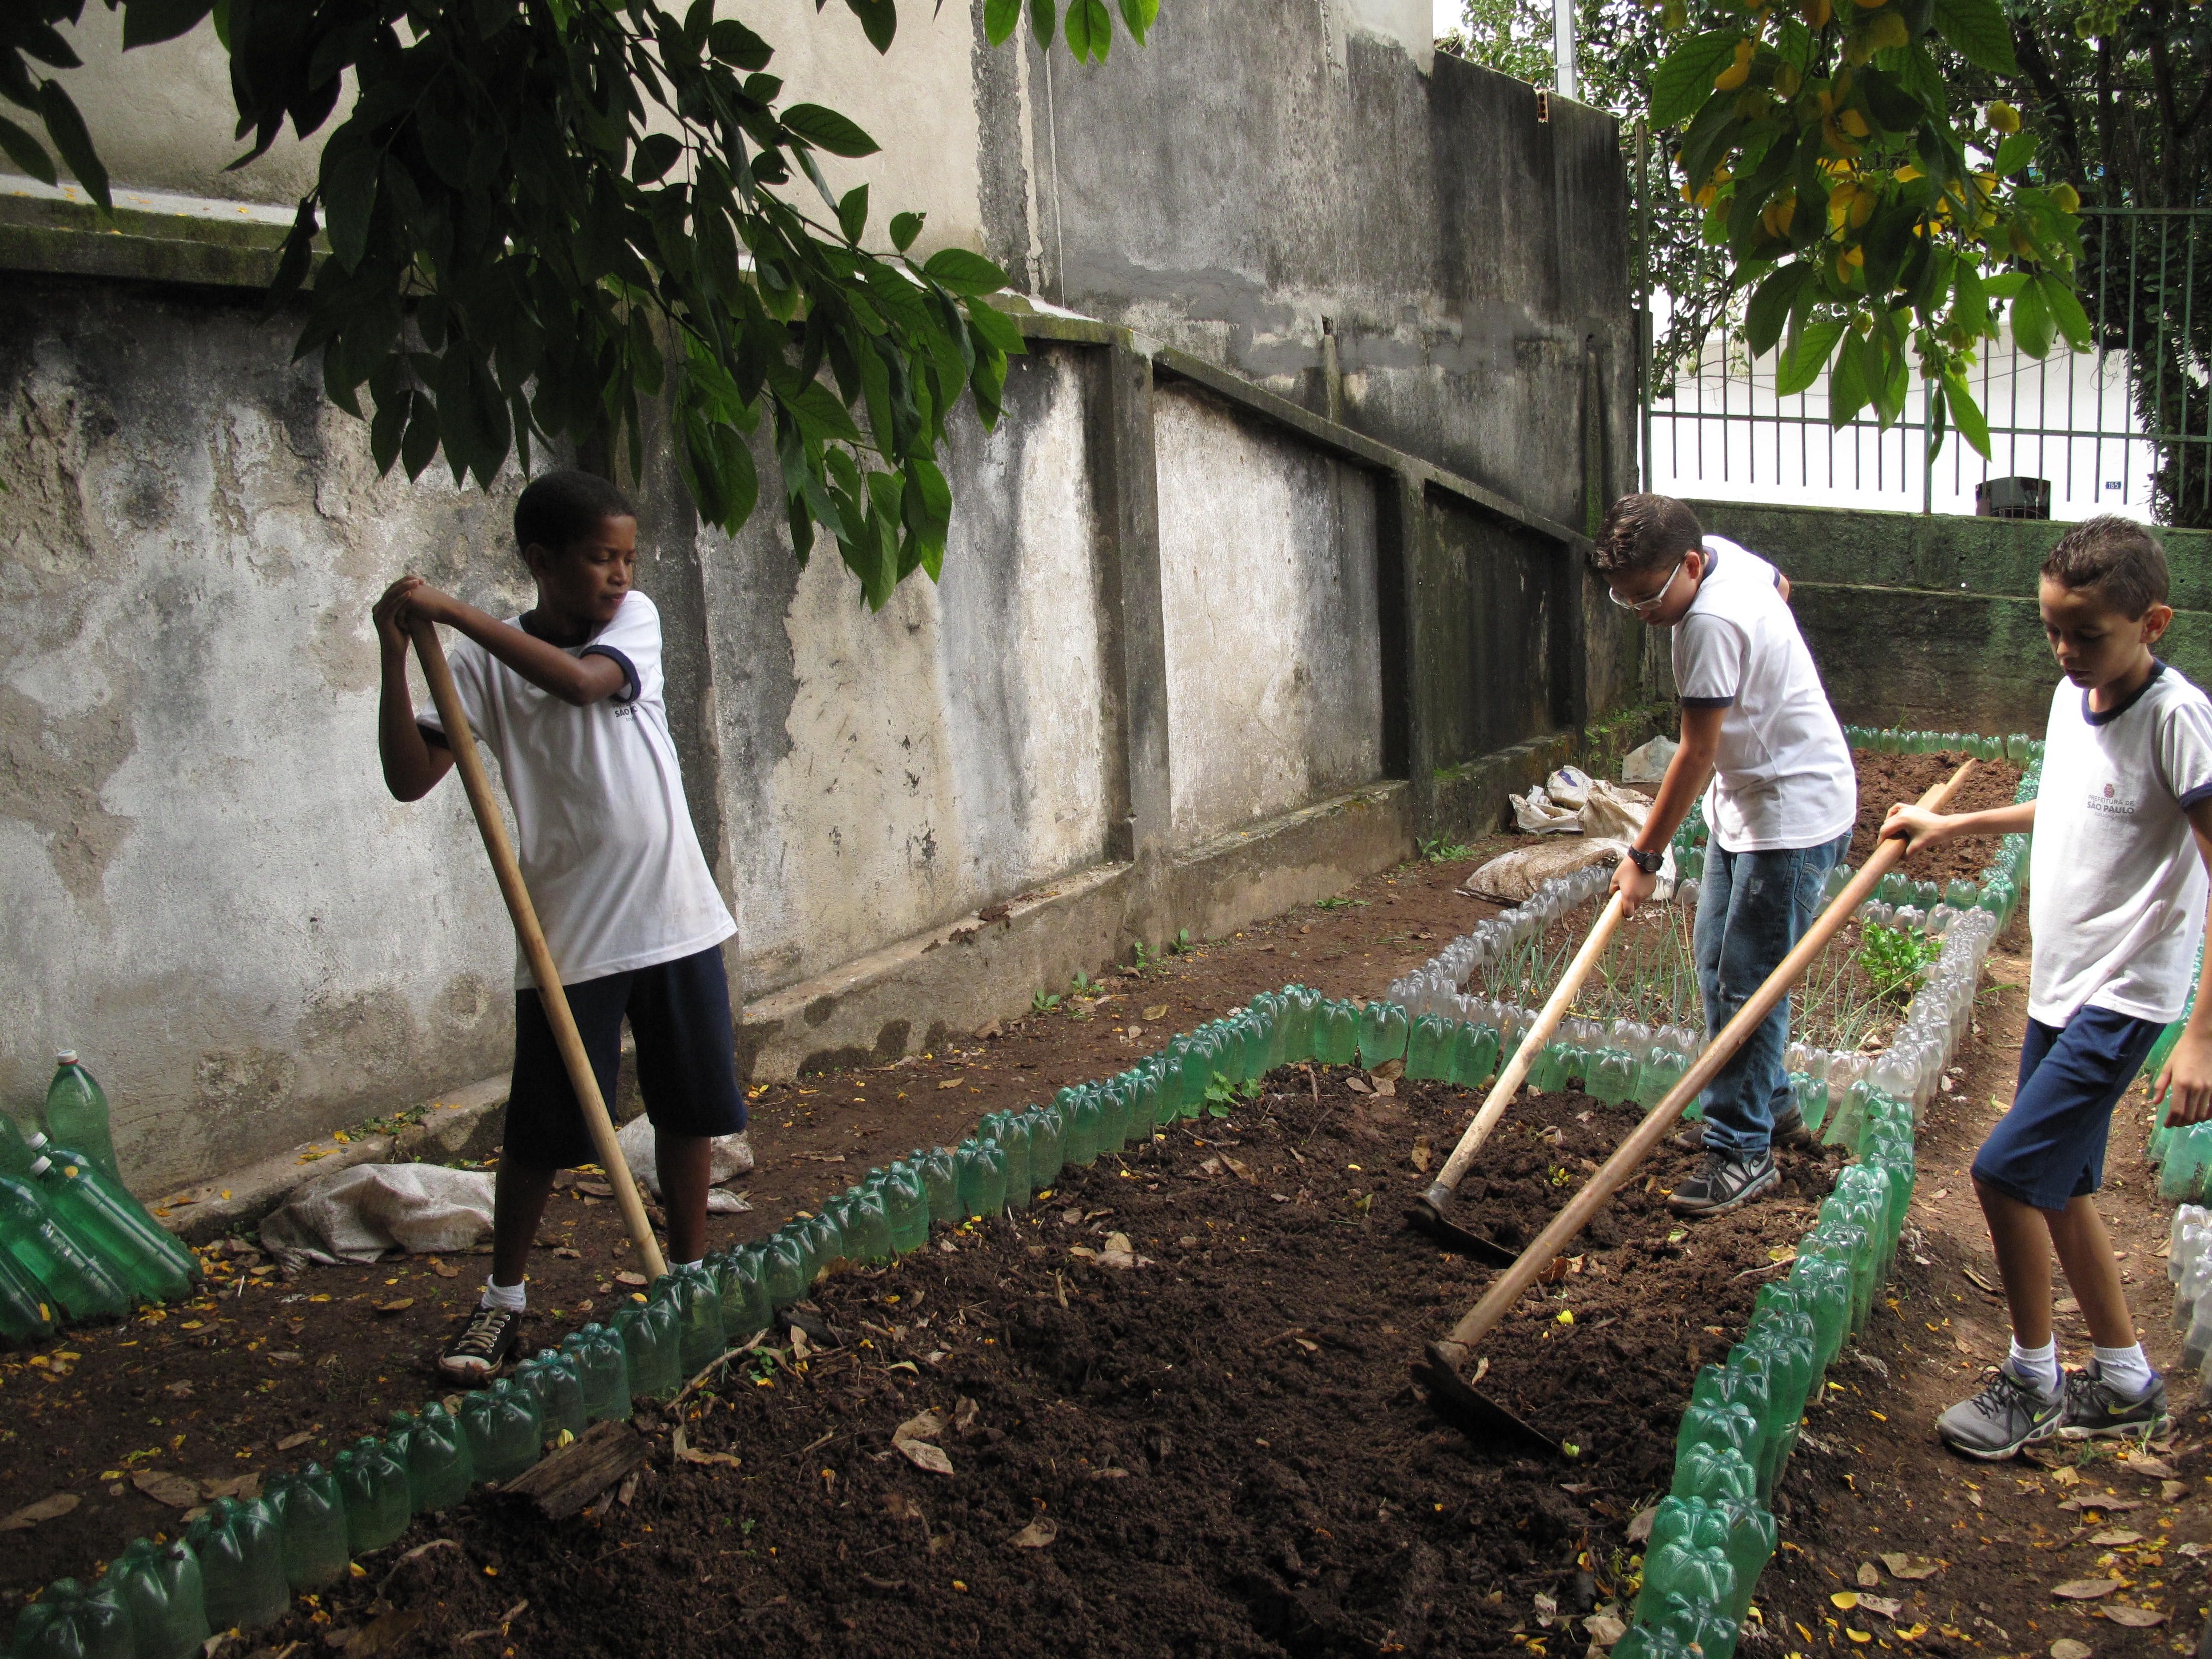 Students at the Leão Machado school dig plots before mixing in compost with the soil. Rhitu Chatterjee. Brazil, 2015. 